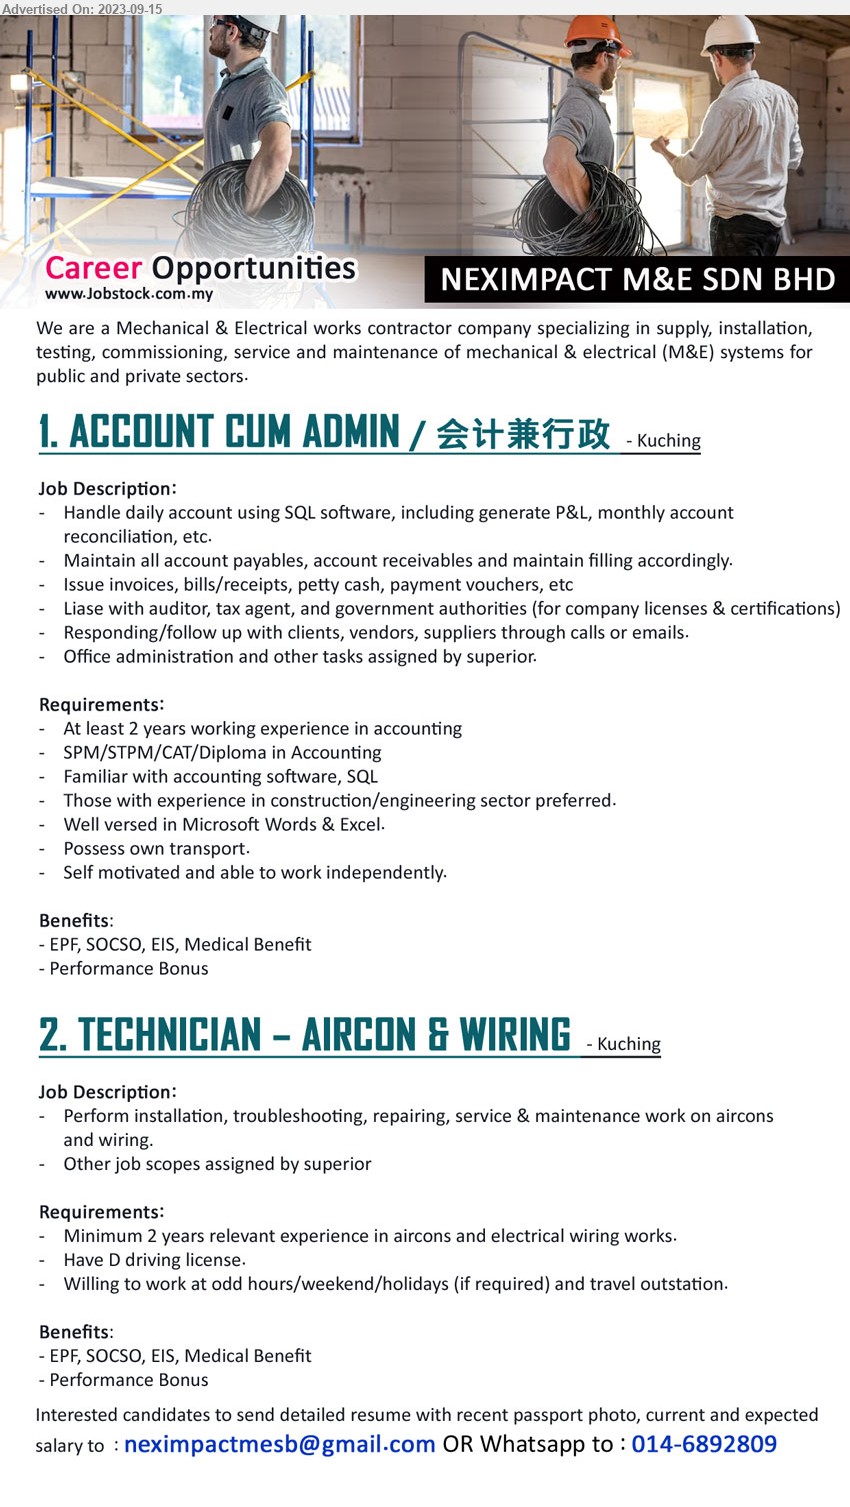 NEXIMPACT M&E SDN BHD - 1. ACCOUNT CUM ADMIN / 会计兼行政  (Kuching), SPM/STPM/CAT/Diploma in Accounting, Familiar with accounting software, SQL,...
2. TECHNICIAN – AIRCON & WIRING  (Kuching), Minimum 2 years relevant experience in aircons and electrical wiring works, Have D driving license.,...
Whatsapp to : 014-6892809 / Email resume to ...